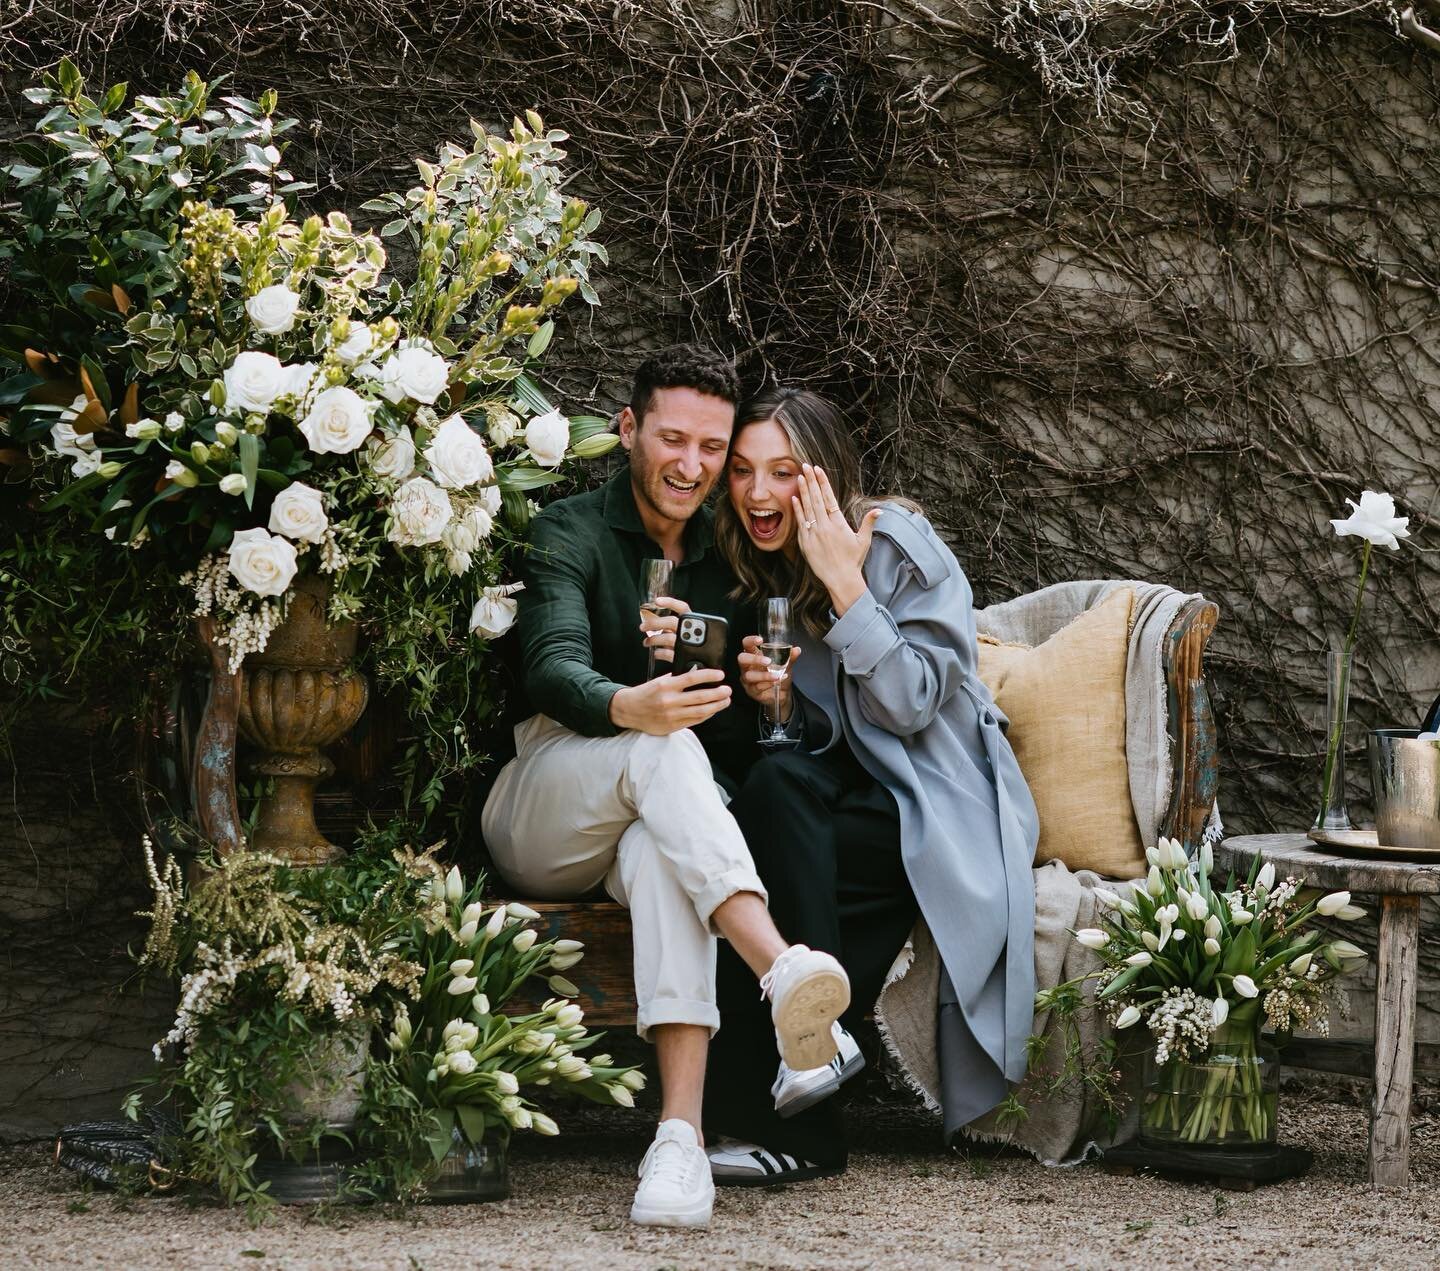 The most perfect surprise proposal under the loggia at The Stables | Congratulations Mike + Gaby!!

&mdash;

&ldquo;I just wanted to say how appreciative I am of all of your efforts this week. Everything happened perfectly and the area looked gorgeou